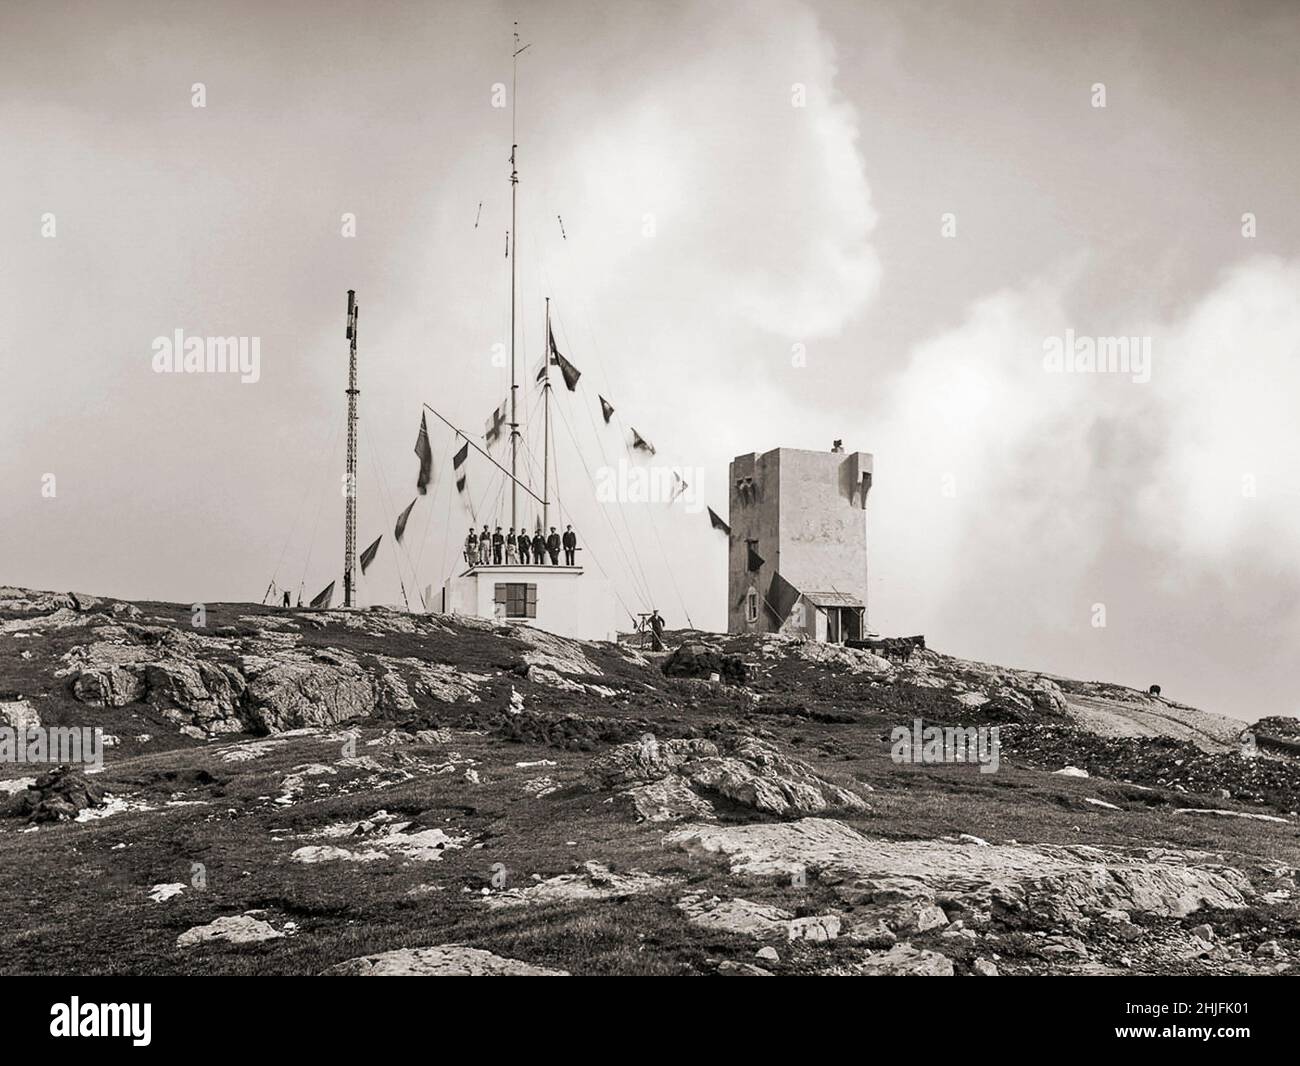 A vintage photograph of the Marconi Wireless Telegraph Station, Malin Head, County Donegal, Ireland, an important staging post for trans-Atlantic communication, shot in 1902. The Wireless Station was situated in Banba’s Tower, originally built as a Martello Lookout Tower during the Napoleonic Wars. Stock Photo